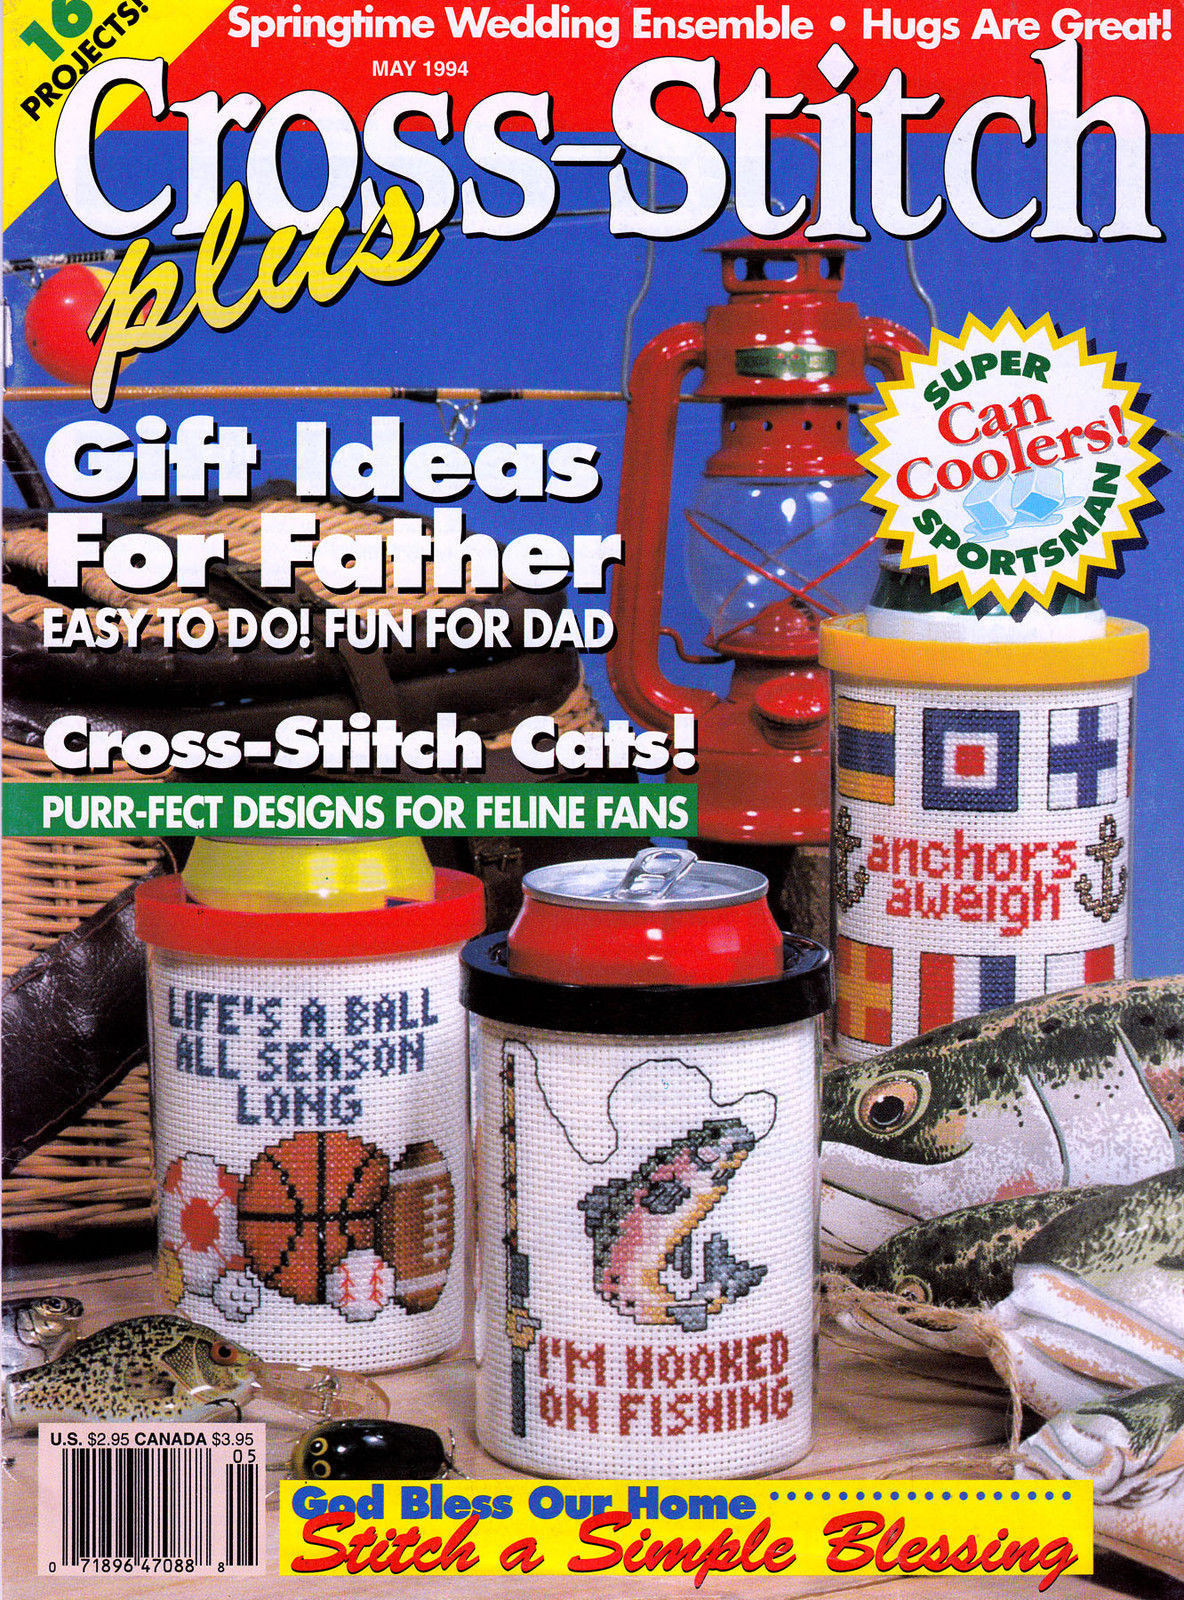 CROSS STITCH DAD GIFTS SPORTS CATS! FLOWER SACHETS SAMPLERS PLUS MAG MAY '94 - $6.98